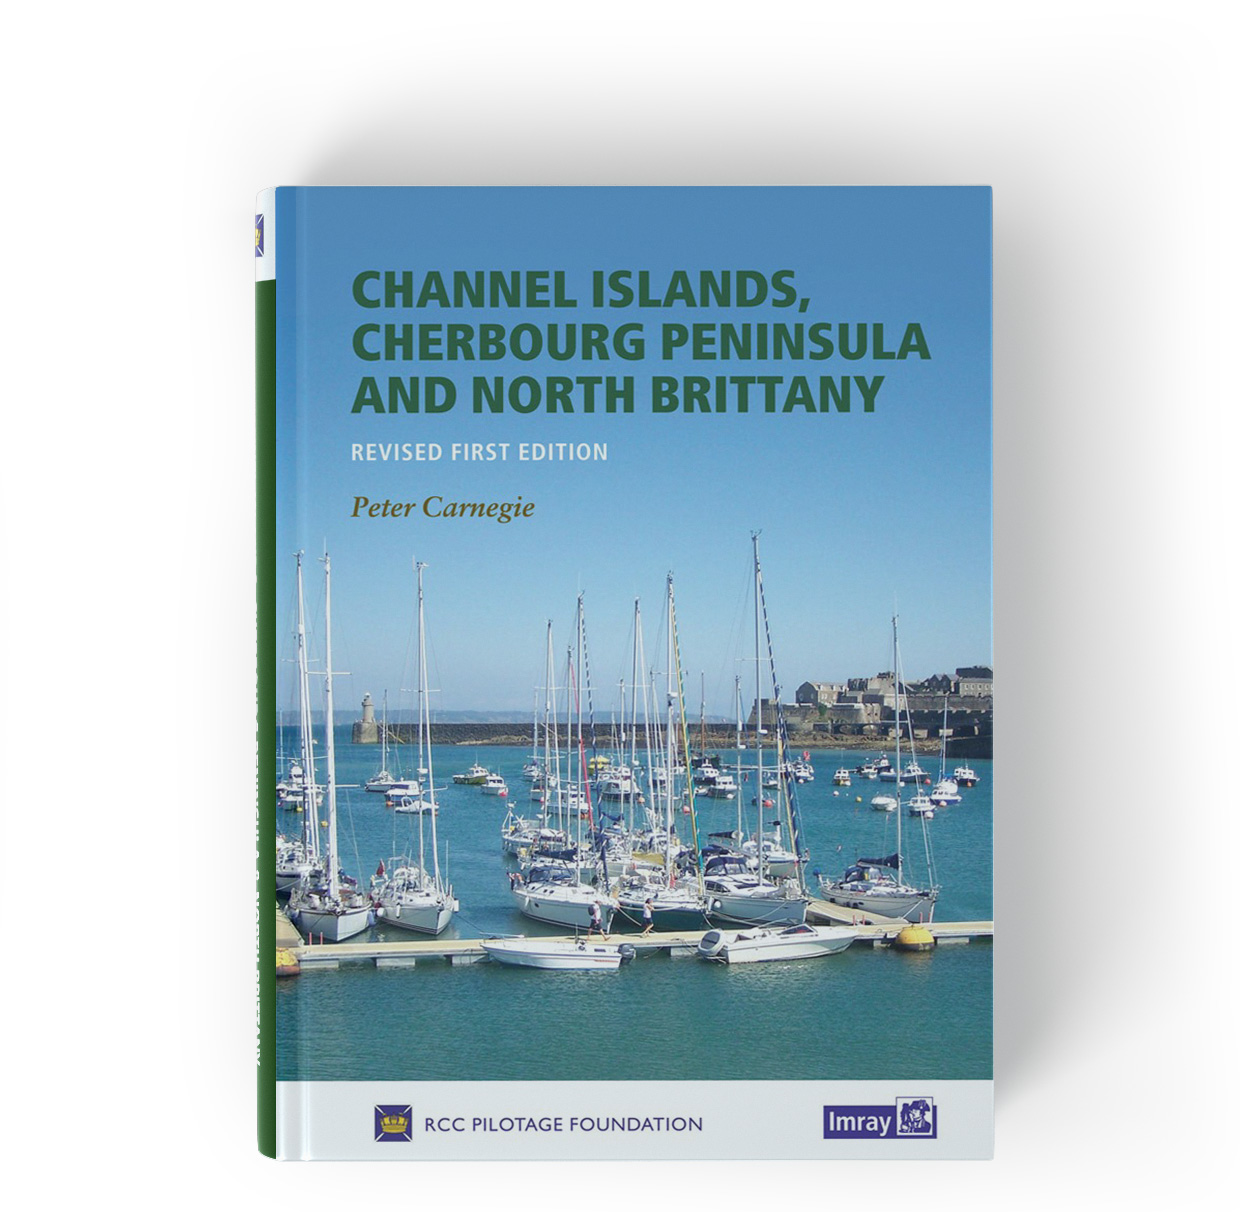 Channel Islands, Cherbourg Peninsula and North Brittany